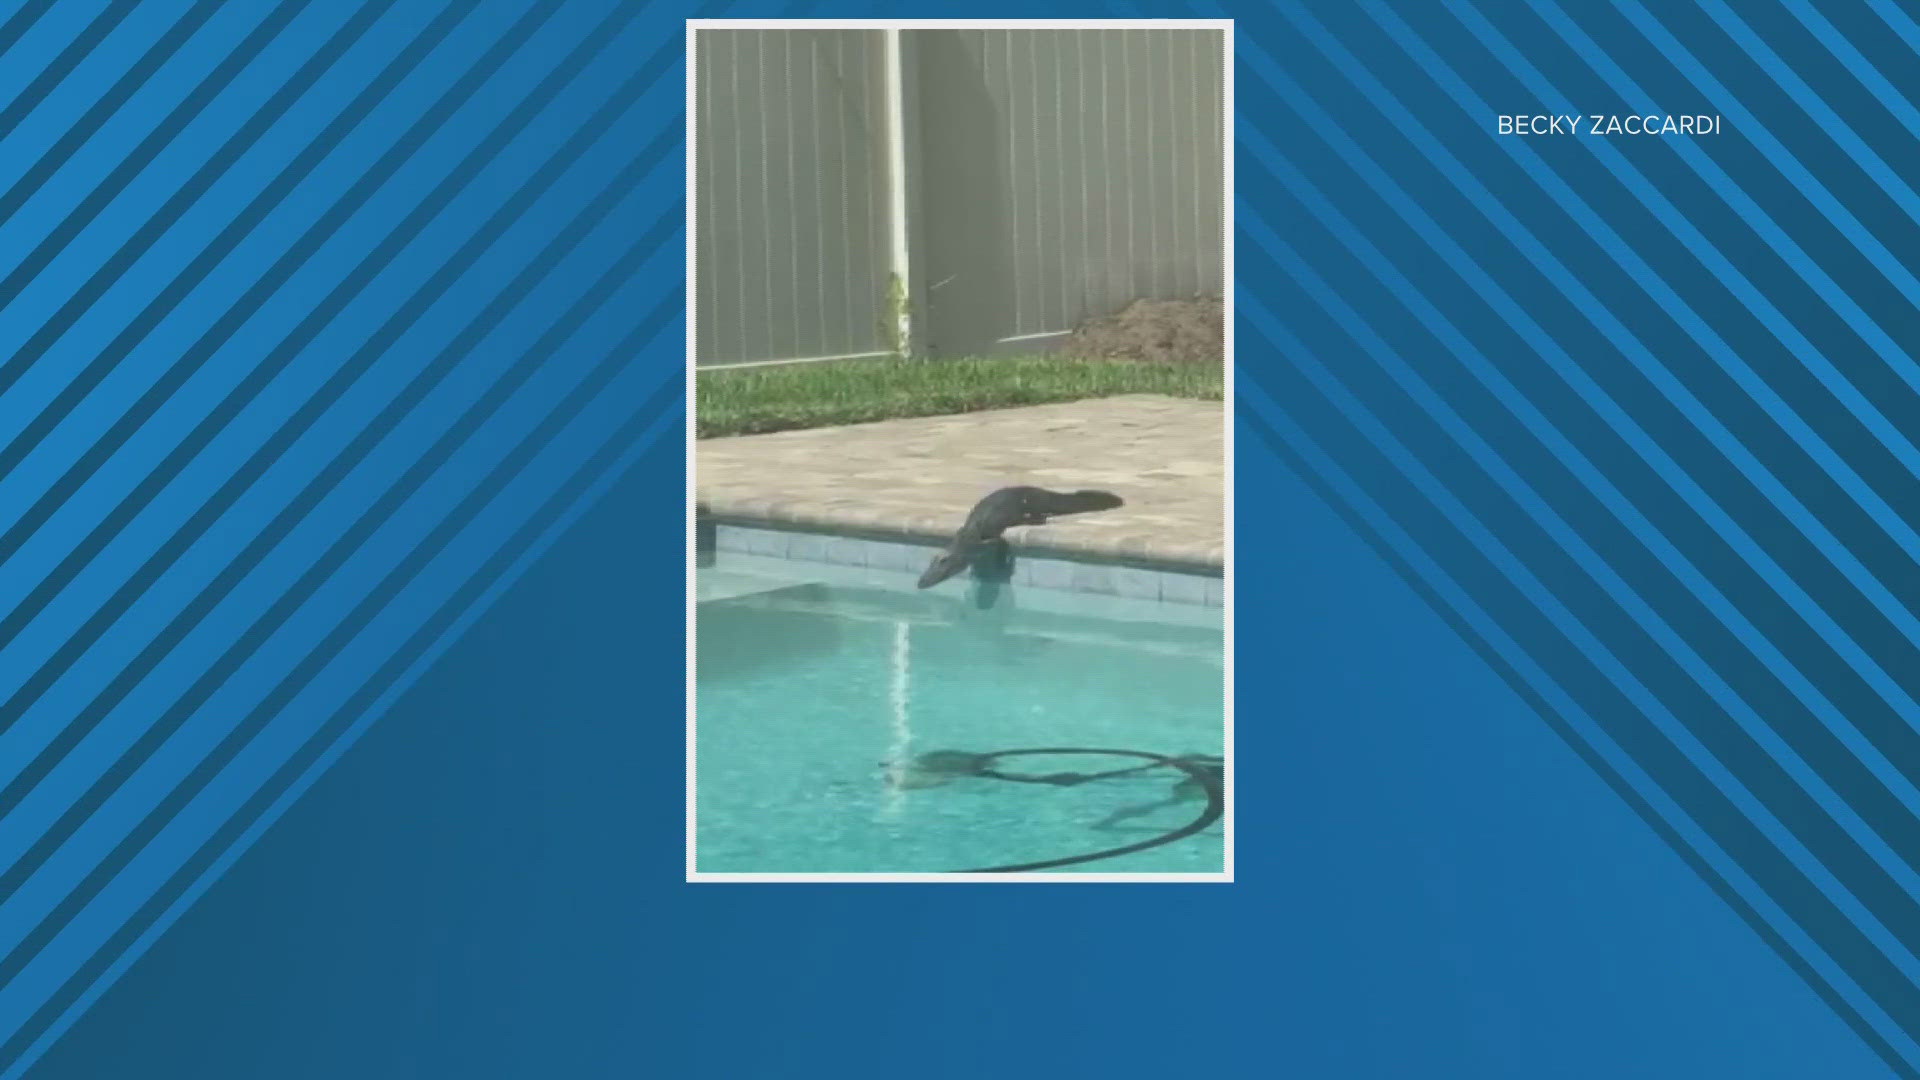 The video was sent to First Coast News by Becky Zaccardi. She said the gator made it a "pretty interesting afternoon" on Friday.